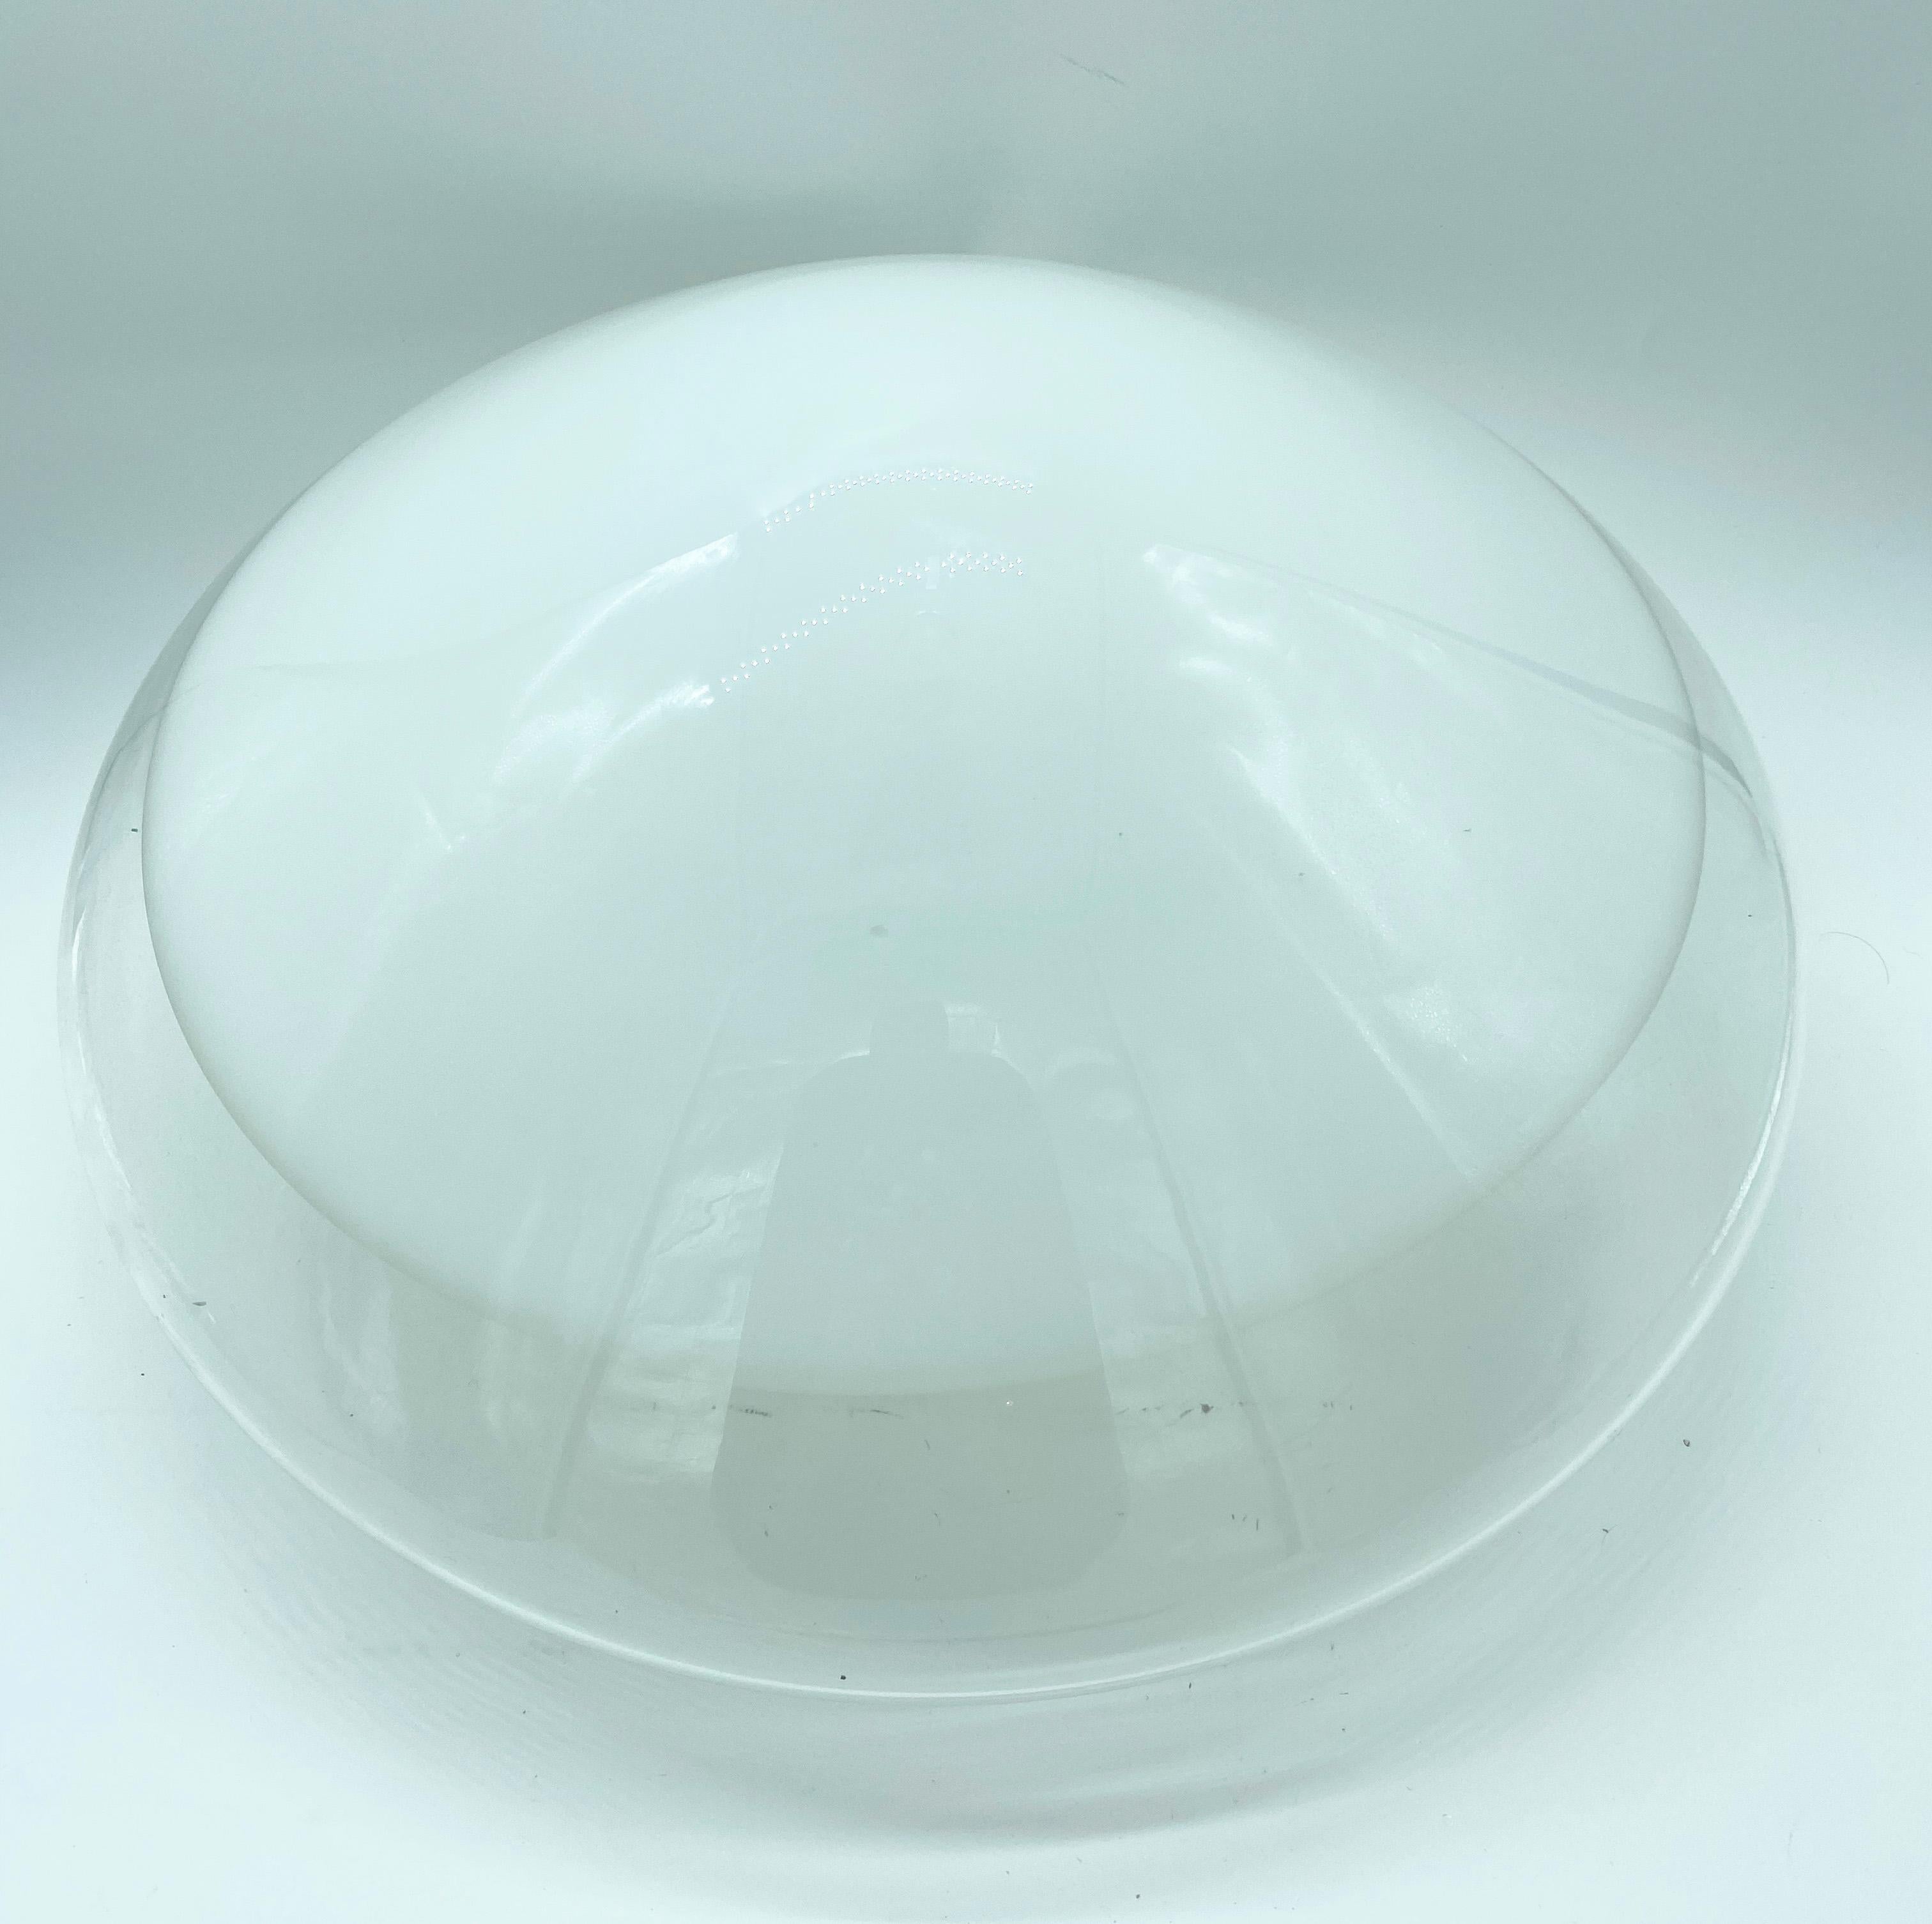 Leucos first designed this in 1962.
This is a wall or ceiling mount featuring a conic, blown-glass diffuser in clear Murano glass with a circular white detail across the front.
The glass diffuser is held in place with three screws that secure it